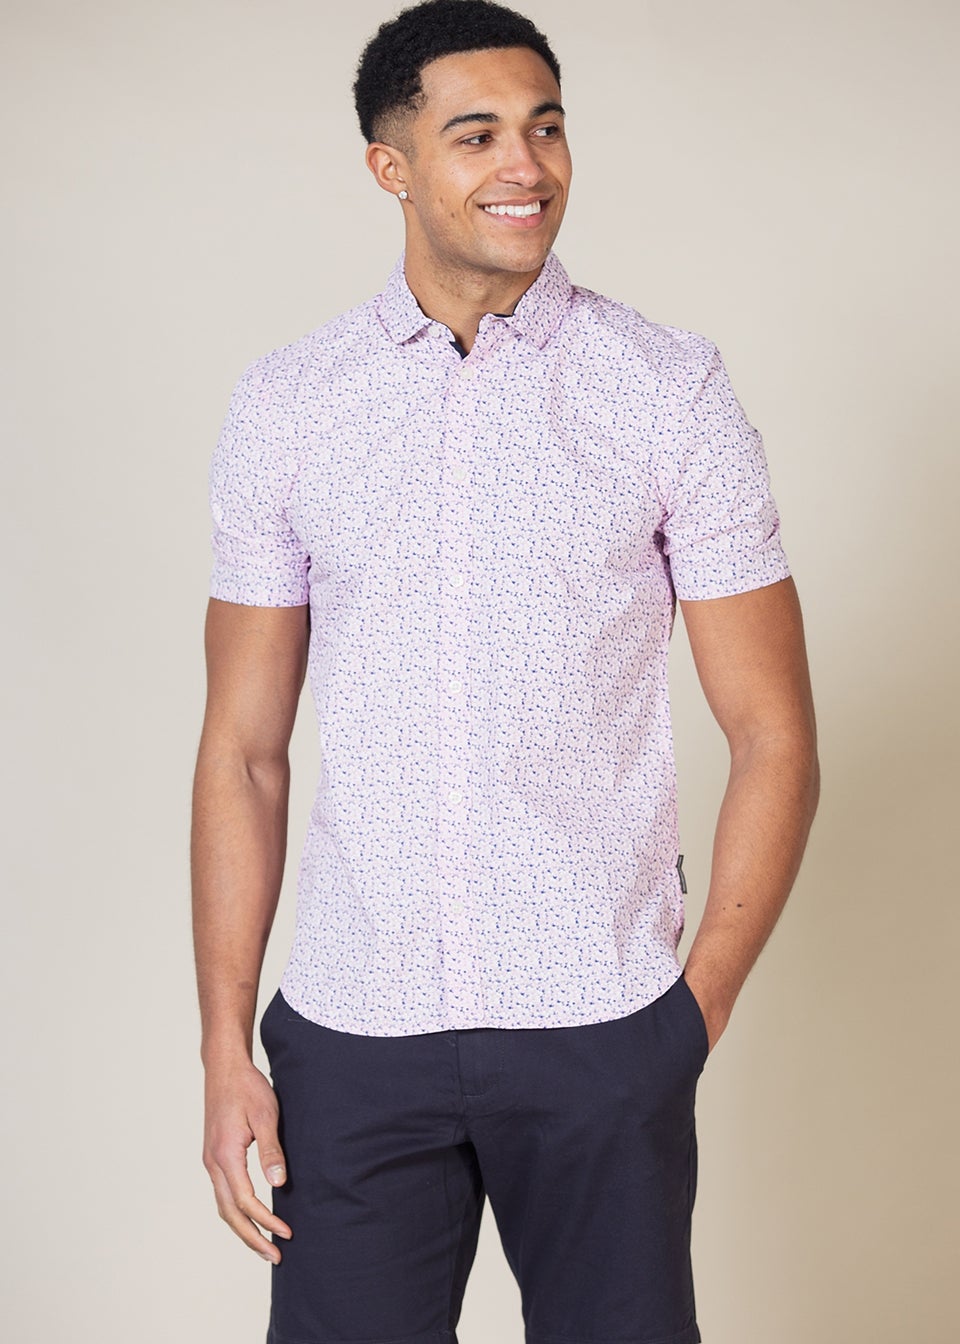 French Connection Pink Patterned Cotton Short Sleeve Shirt